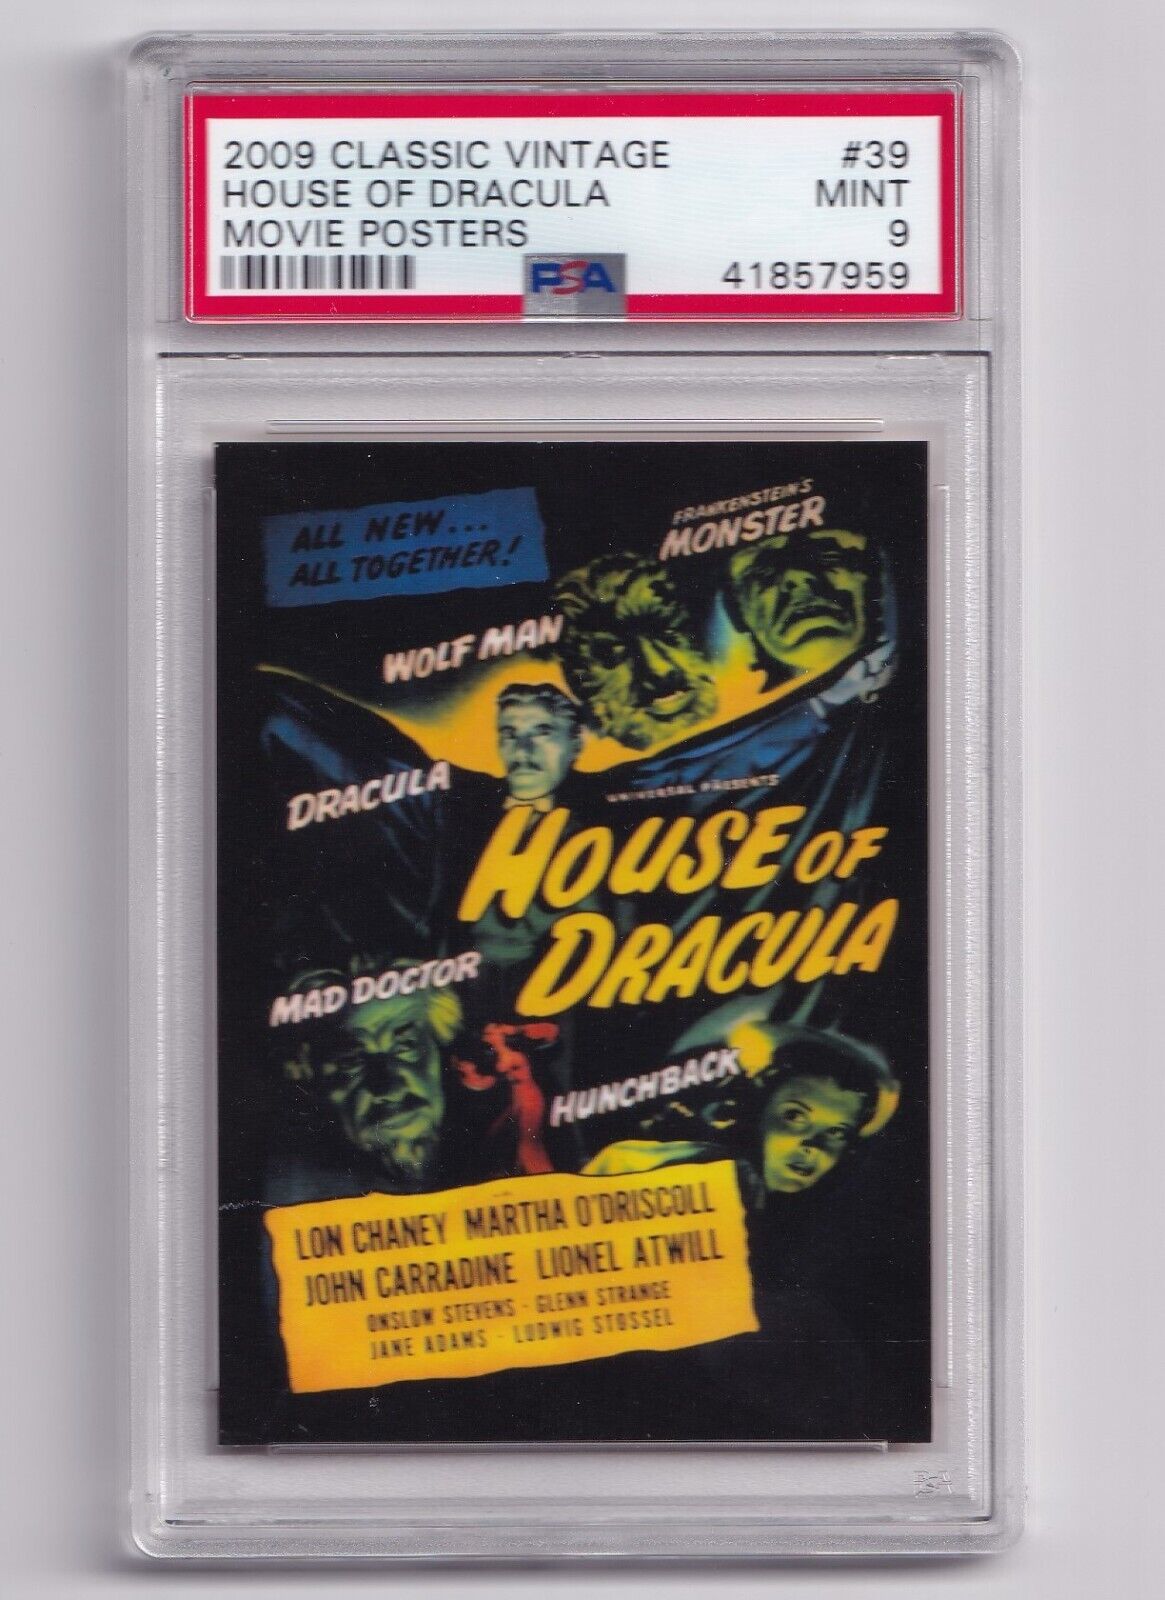 HOUSE OF DRACULA Classic Vintage Movie Posters Card (PSA 9 - POP 1)